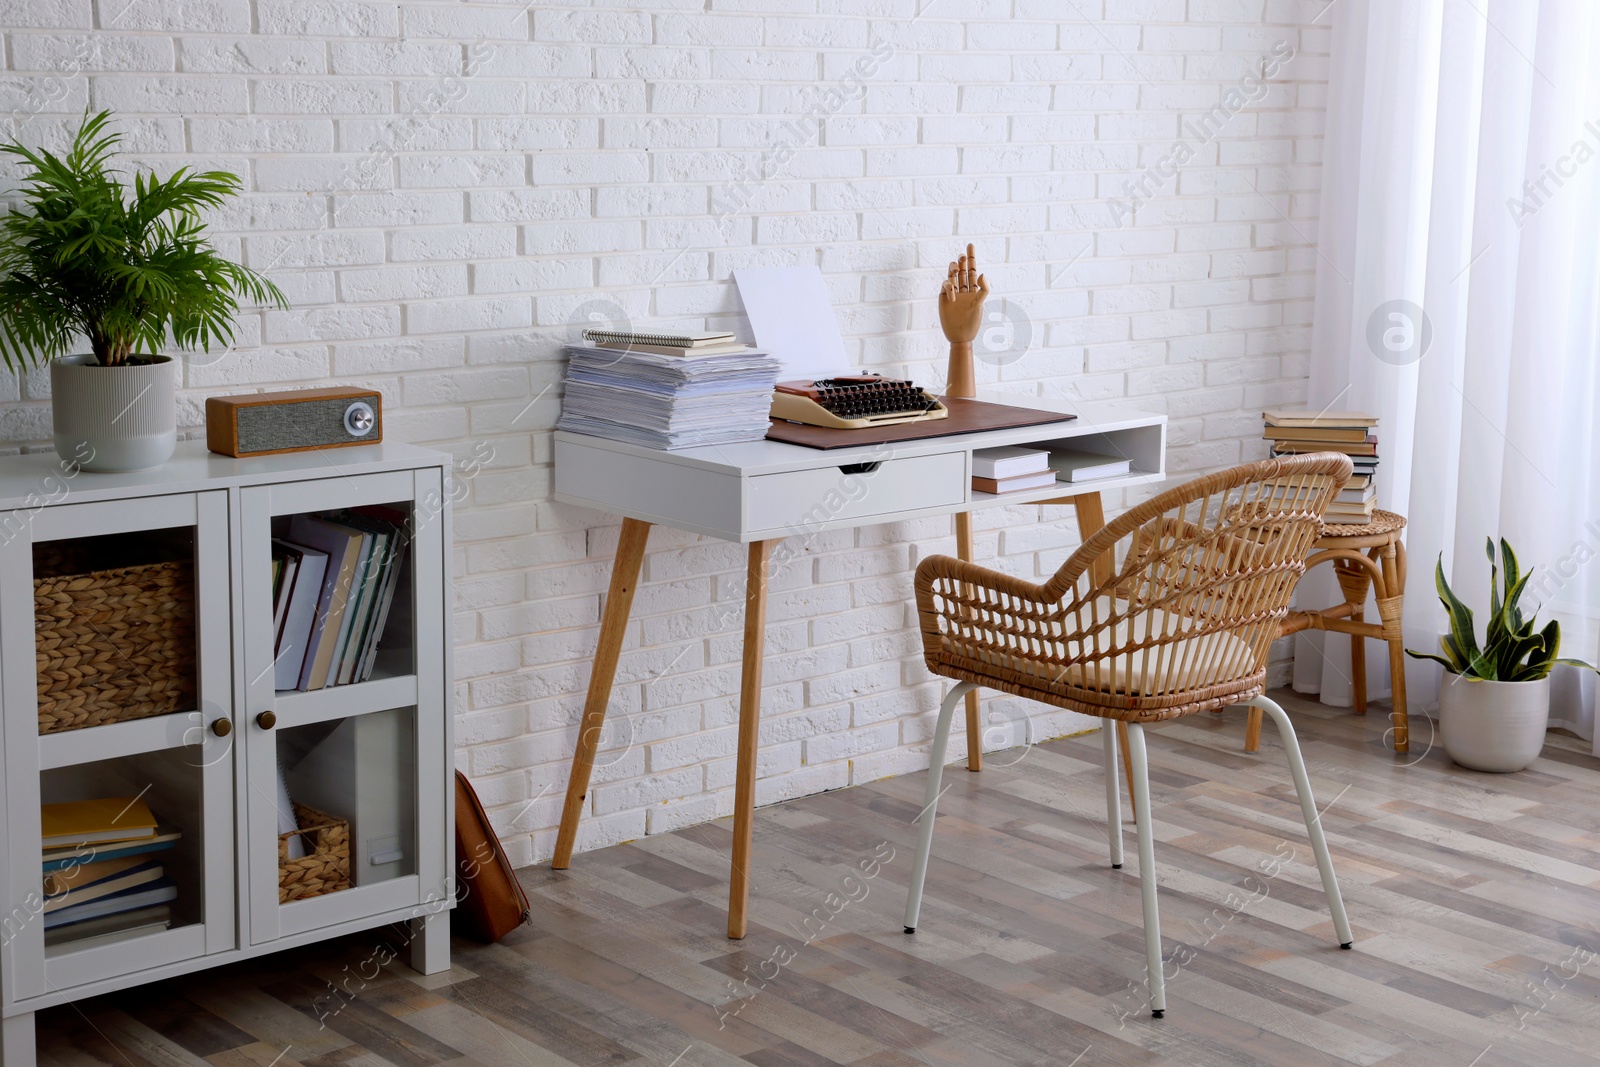 Photo of Comfortable writer's workplace interior with typewriter on desk near white brick wall